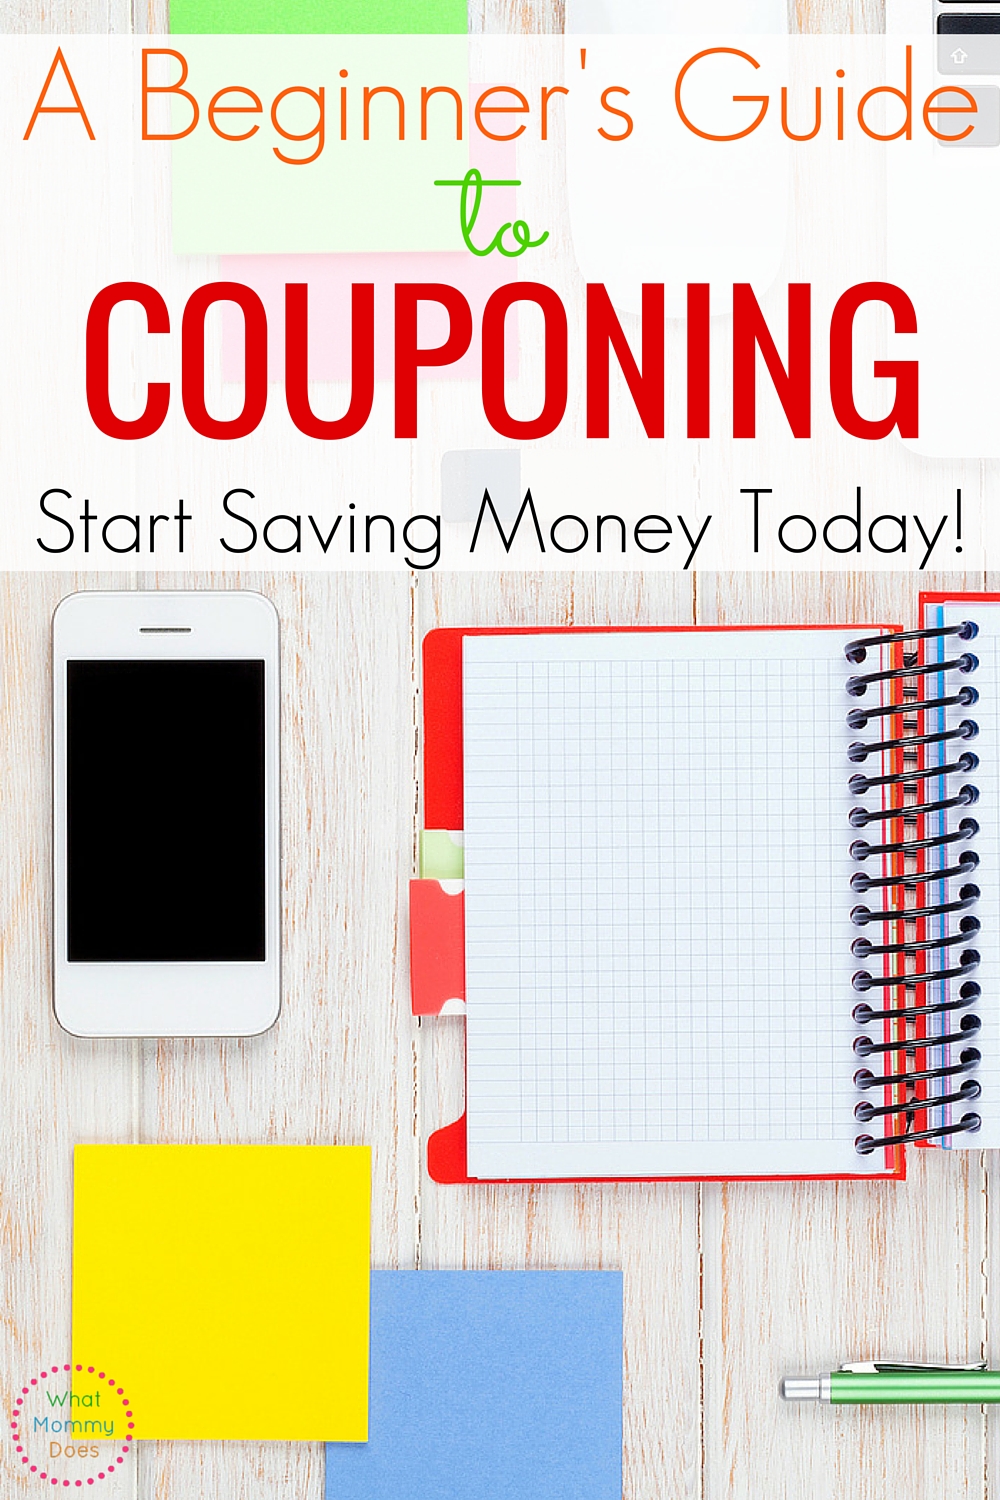 This couponing for beginners crash course is amazing! It's very helpful if you want to save money on groceries and other items!